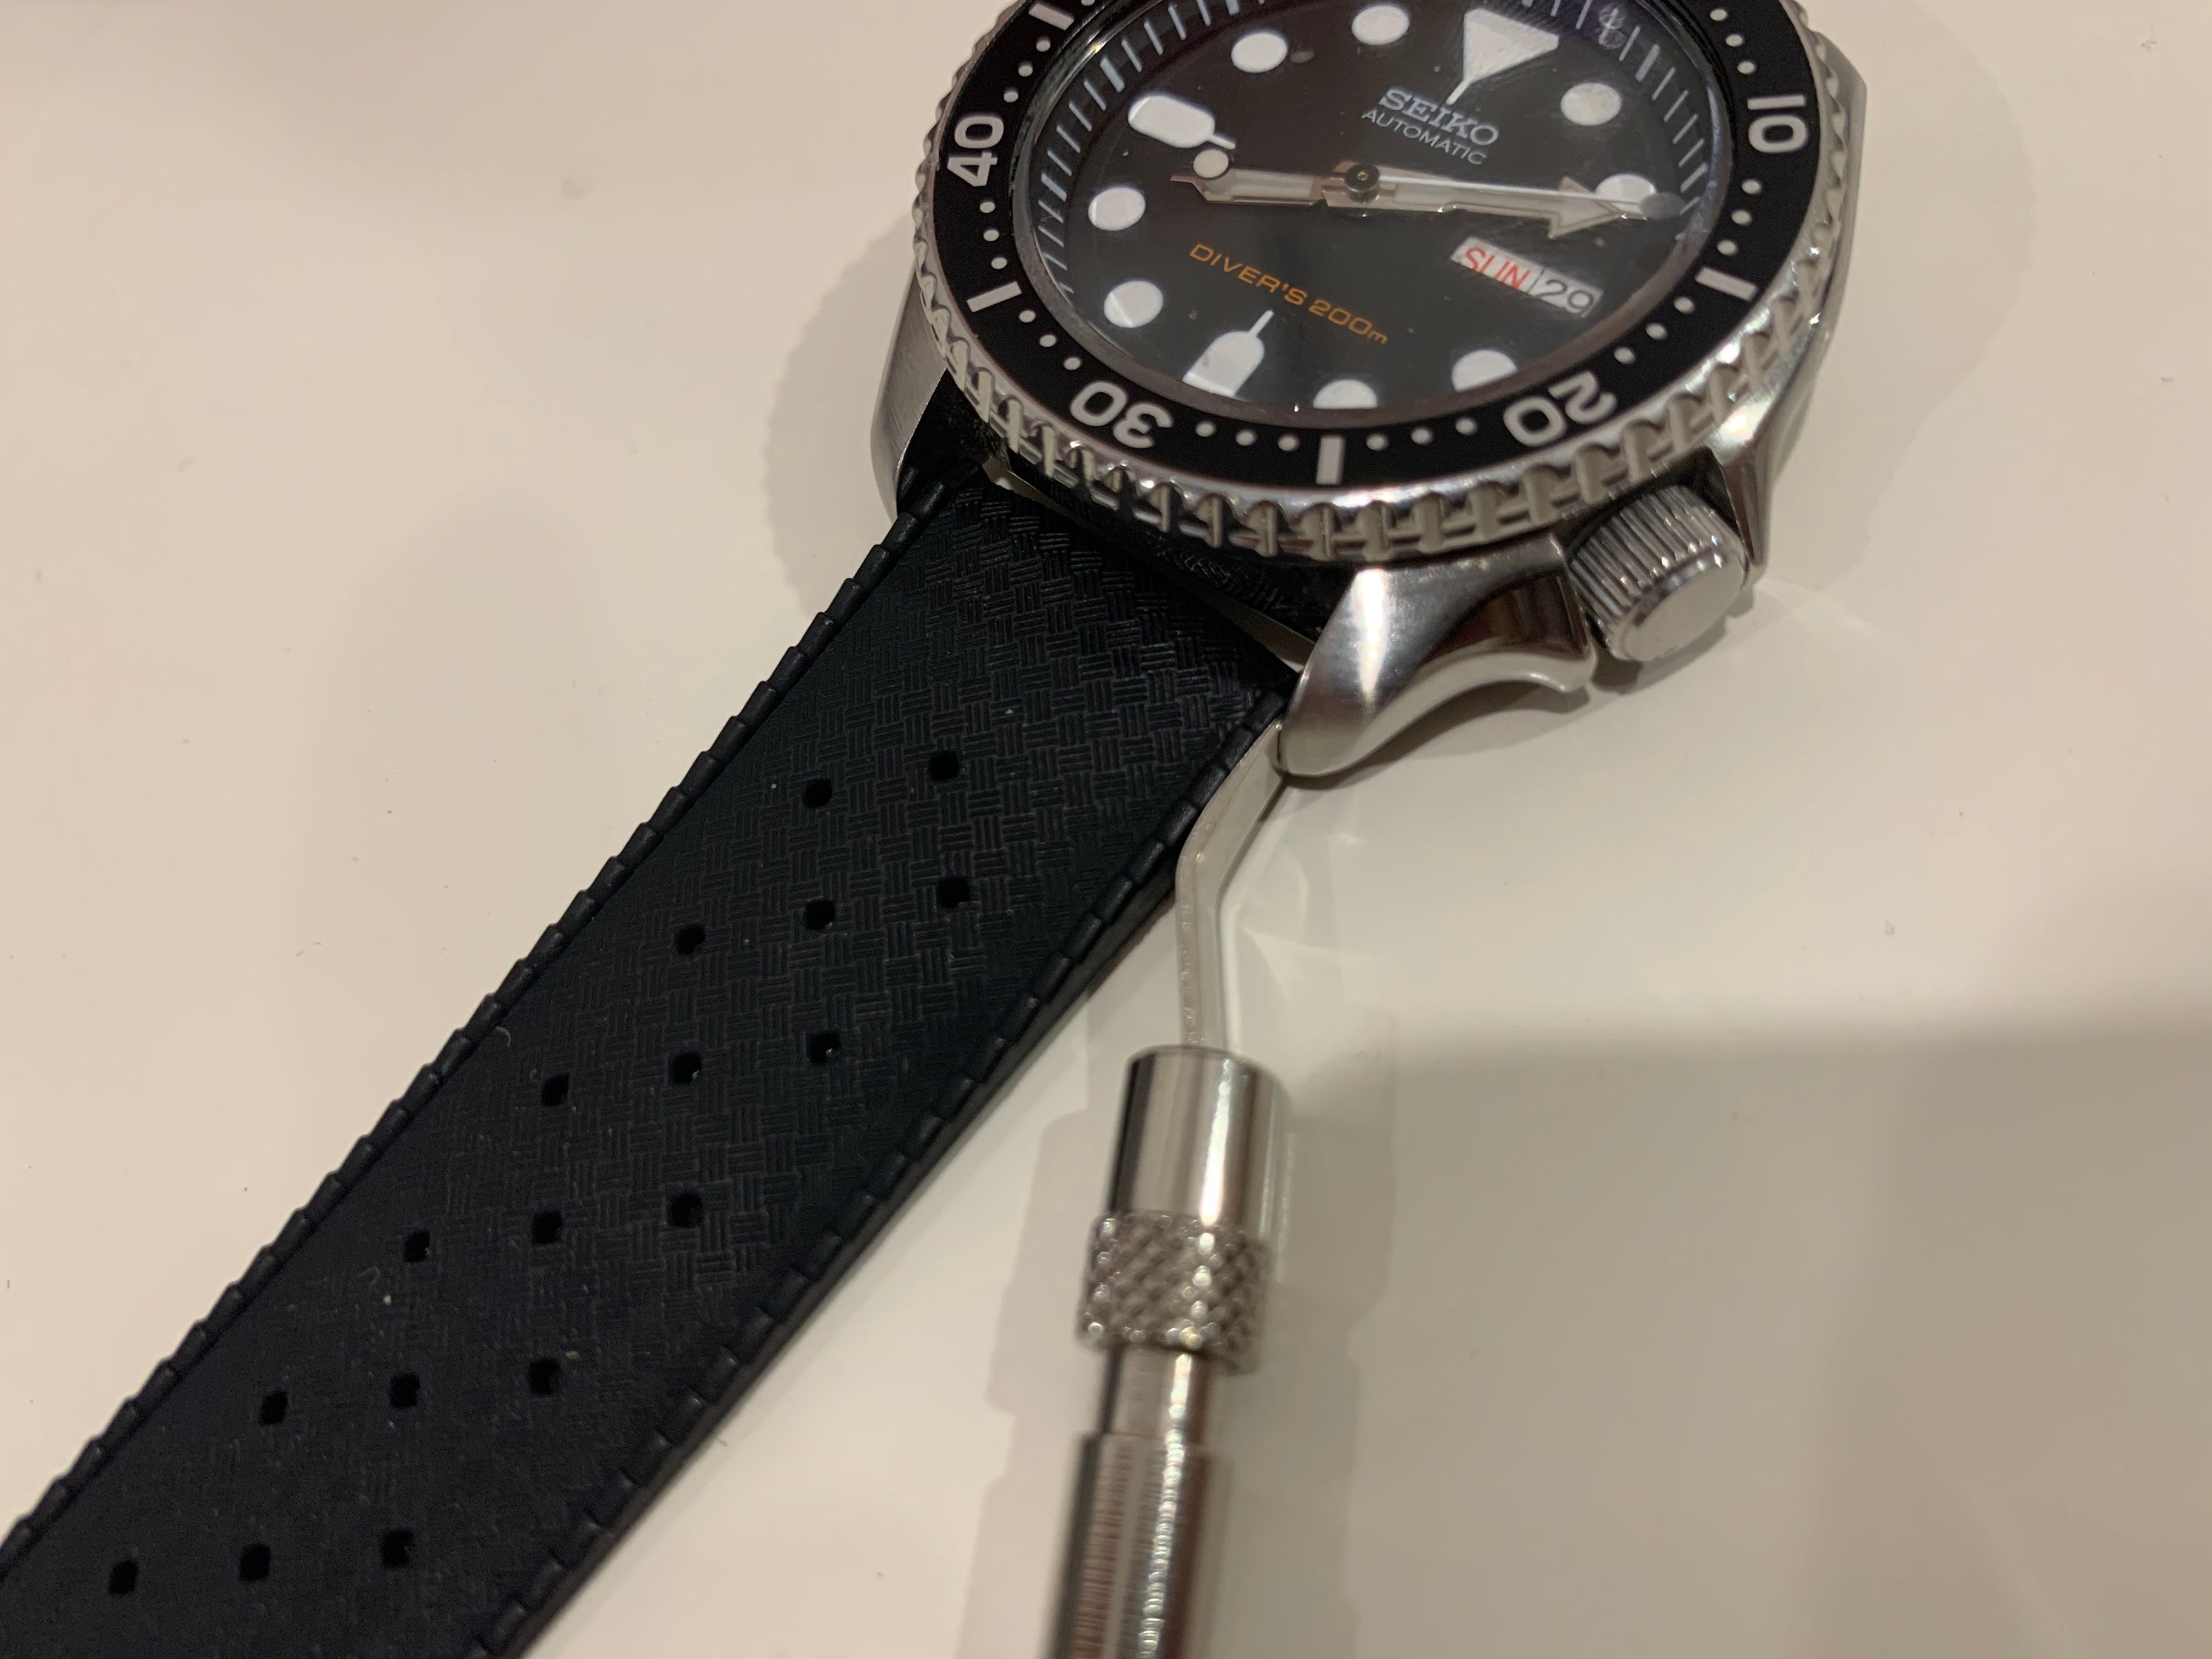 How to change your watch strap?